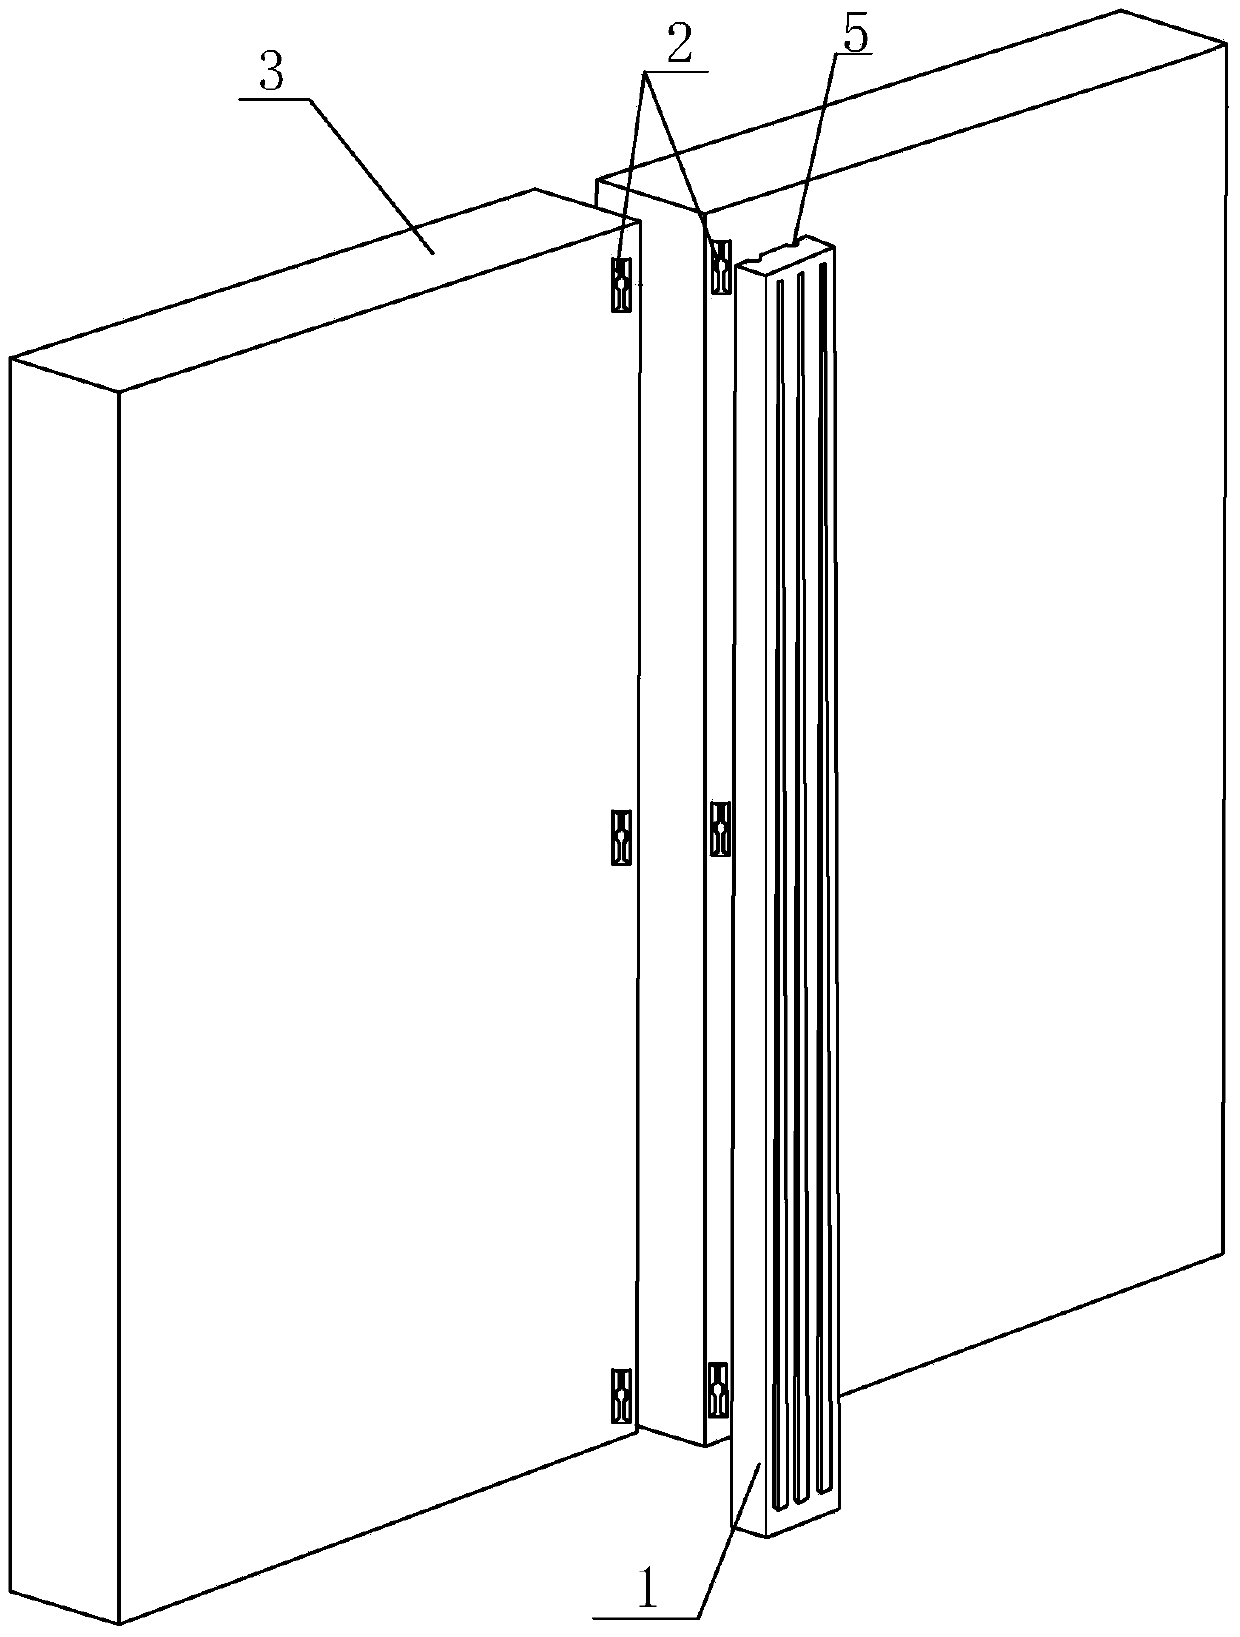 Connecting structure for marble pillar trim strip and furniture